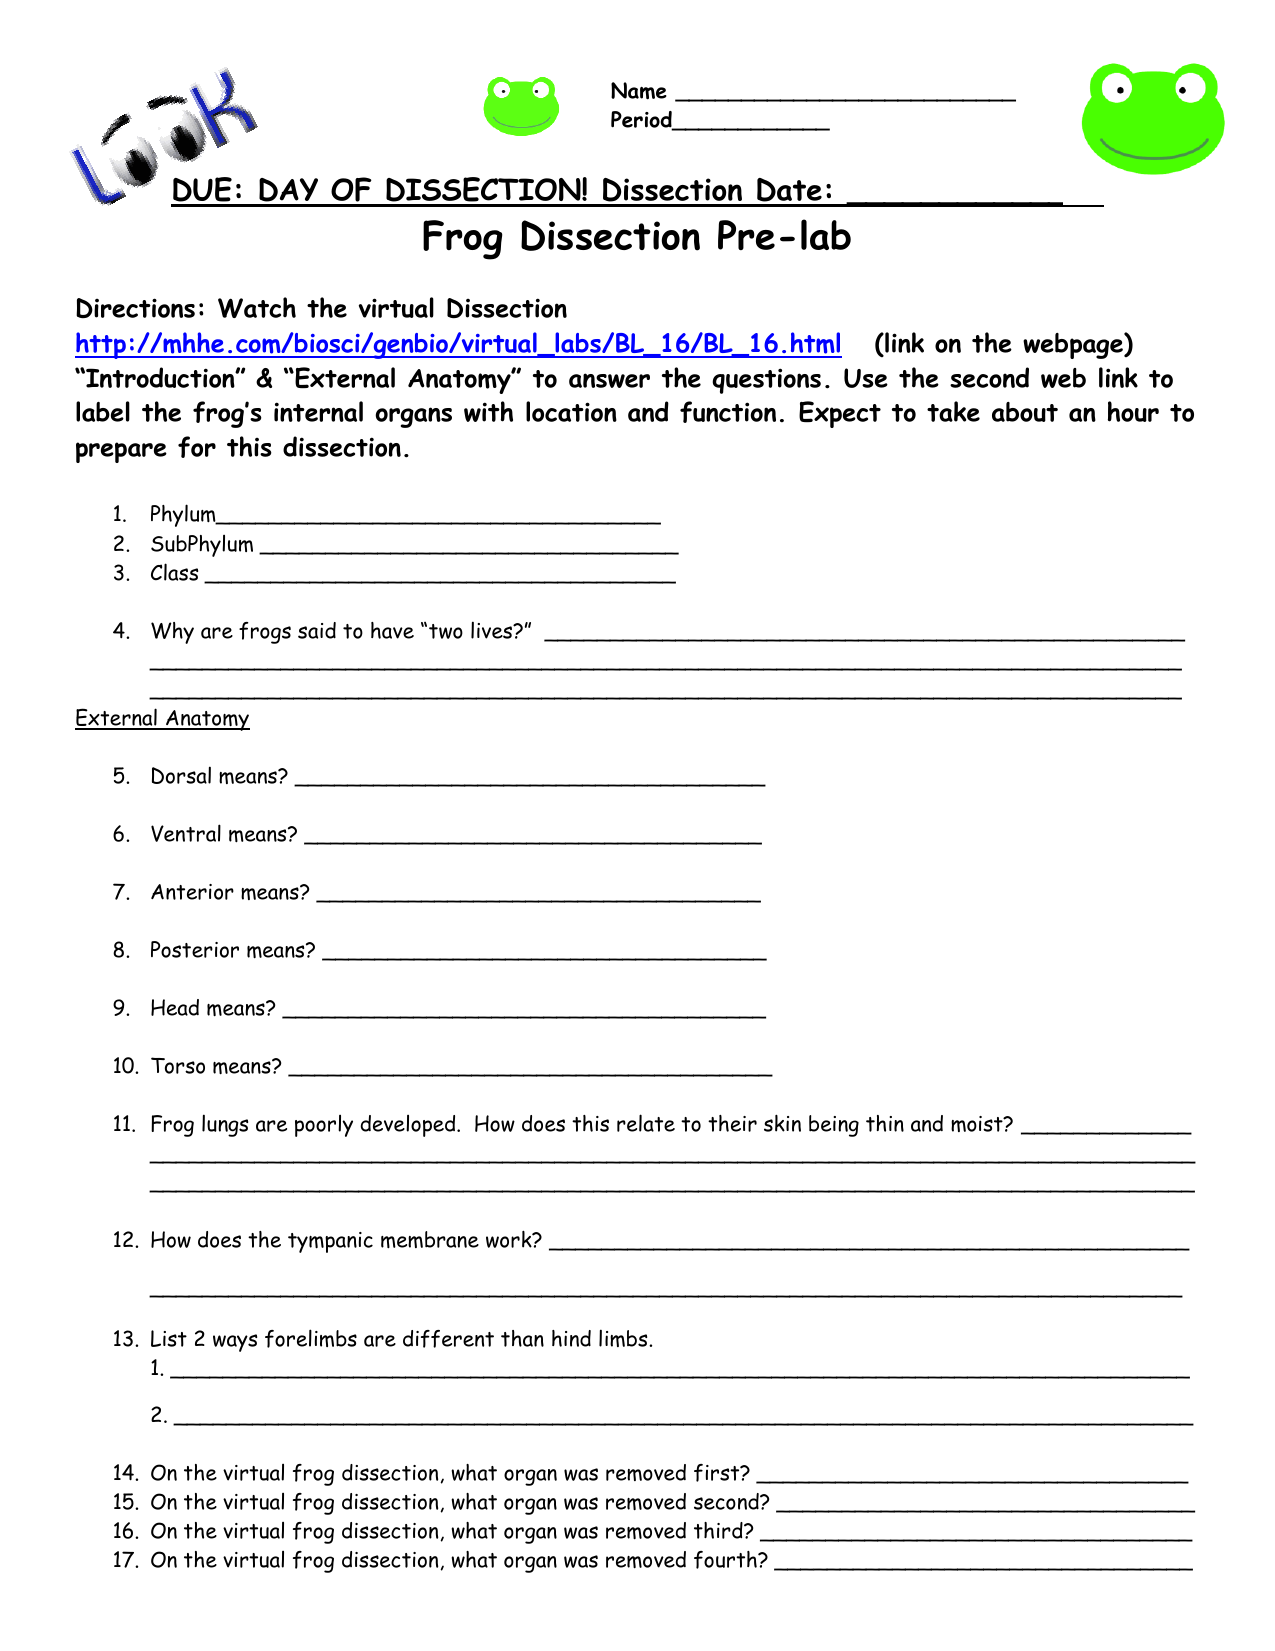 Frog Dissection Worksheet With Frog Dissection Pre Lab Worksheet